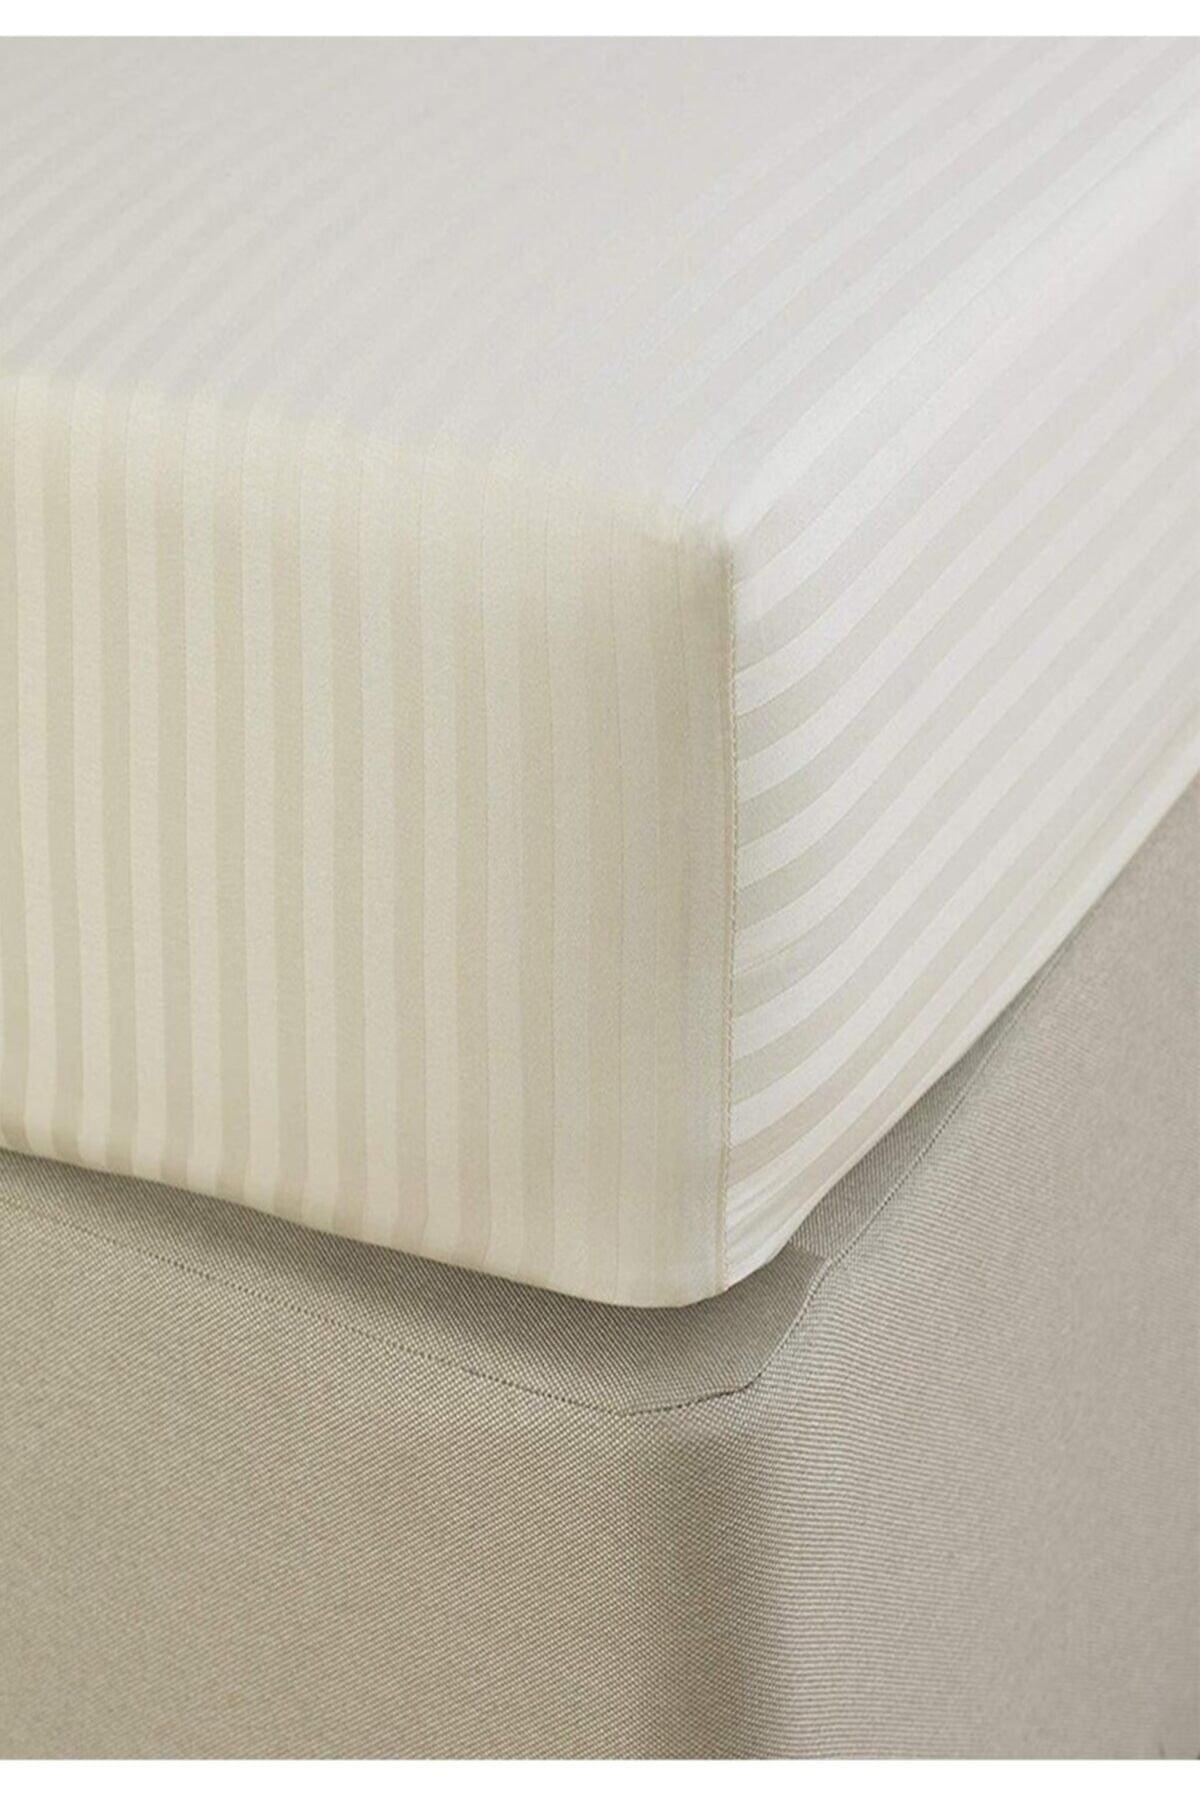 100% Cotton Satin Elastic Bed Sheet Striped Double White/color Hotel Type Luxury Padded - Swordslife